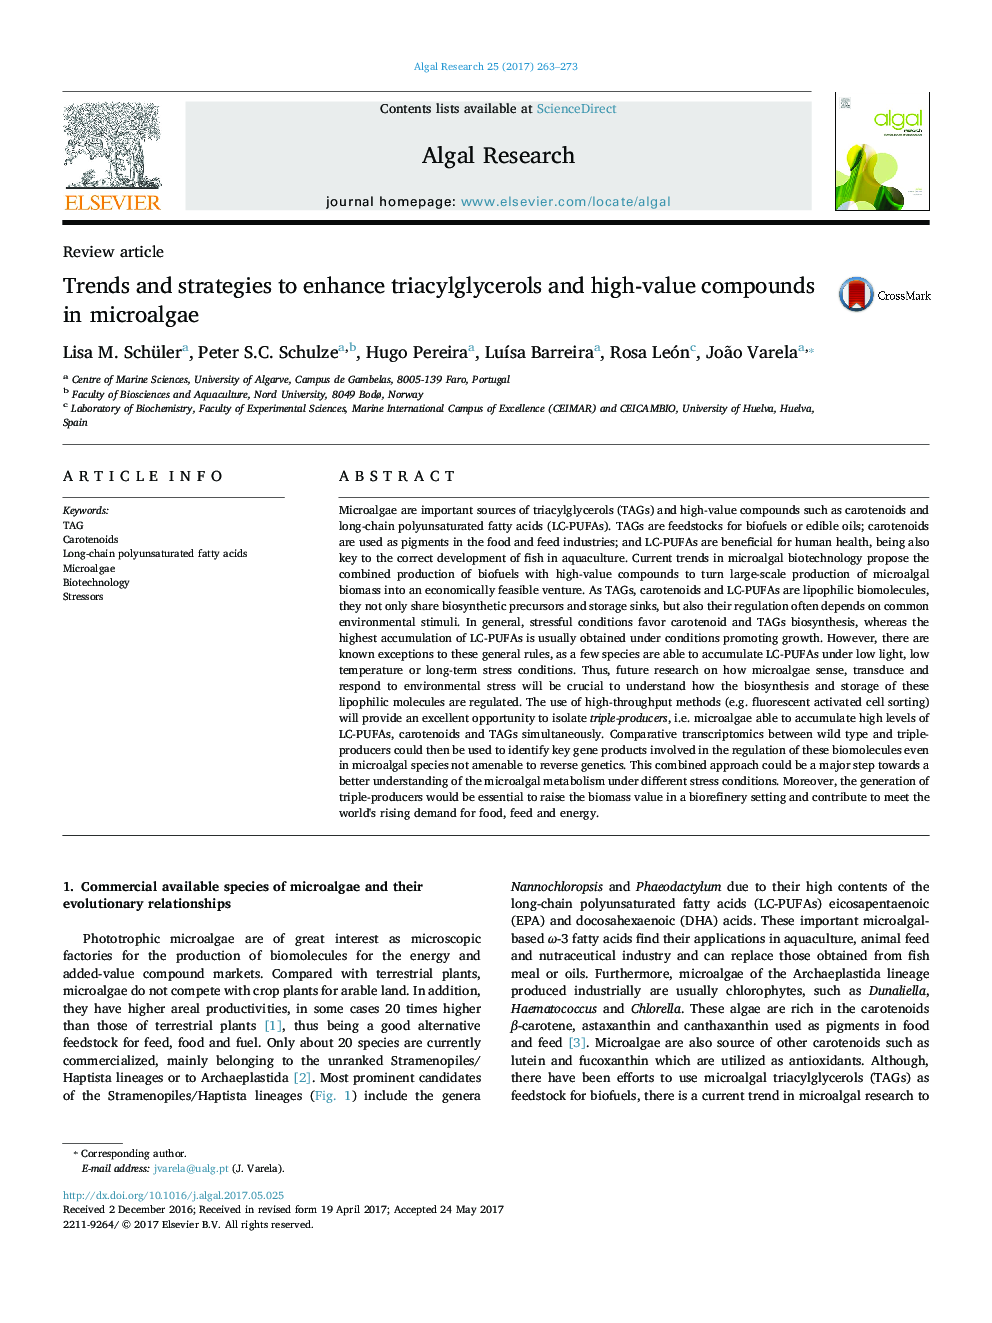 Trends and strategies to enhance triacylglycerols and high-value compounds in microalgae